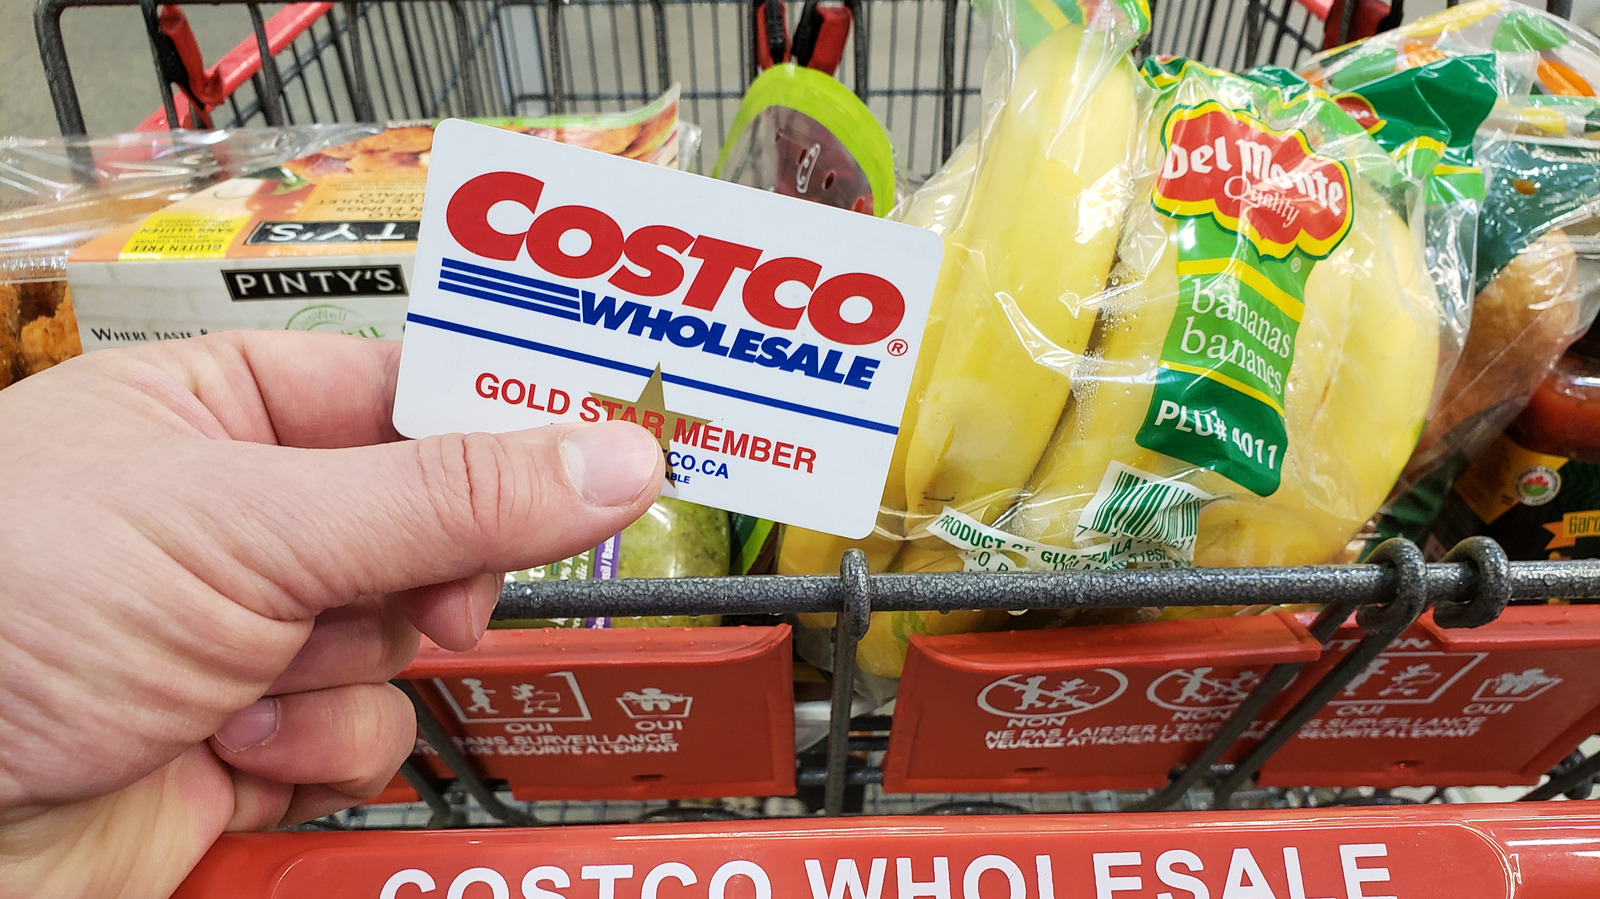 Costco Wholesale #viral #fyp #goodfinds #shopoholic #shopping #costco